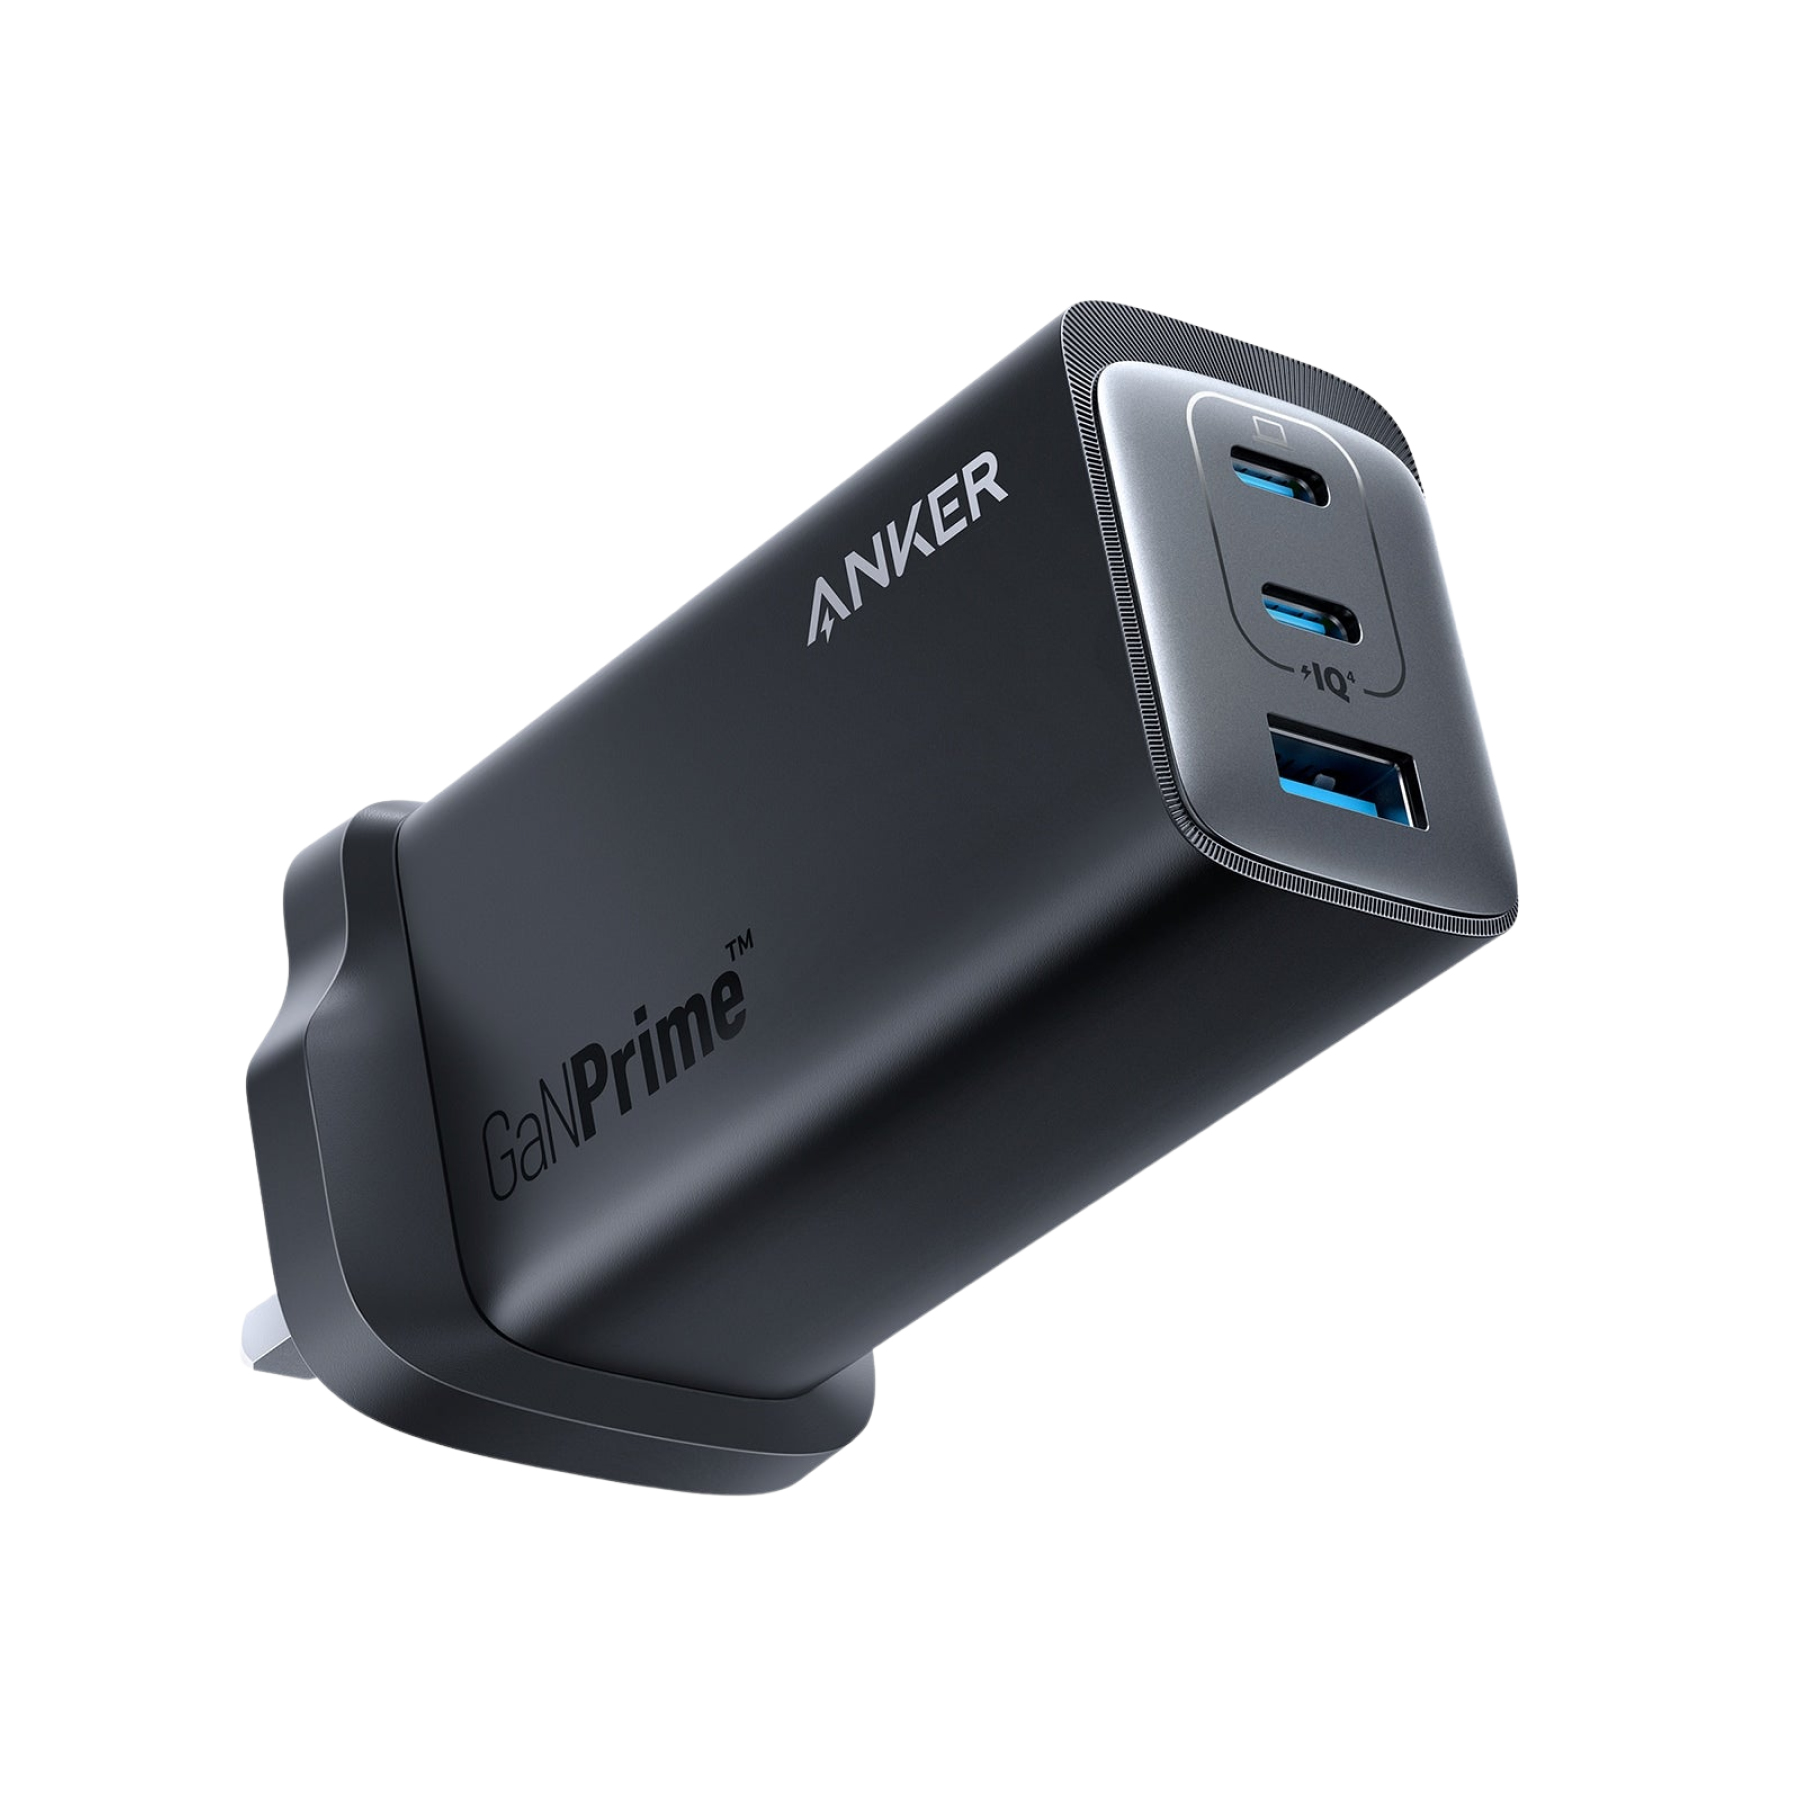 Photos - Charger ANKER 737 Black Indoor A2148211 